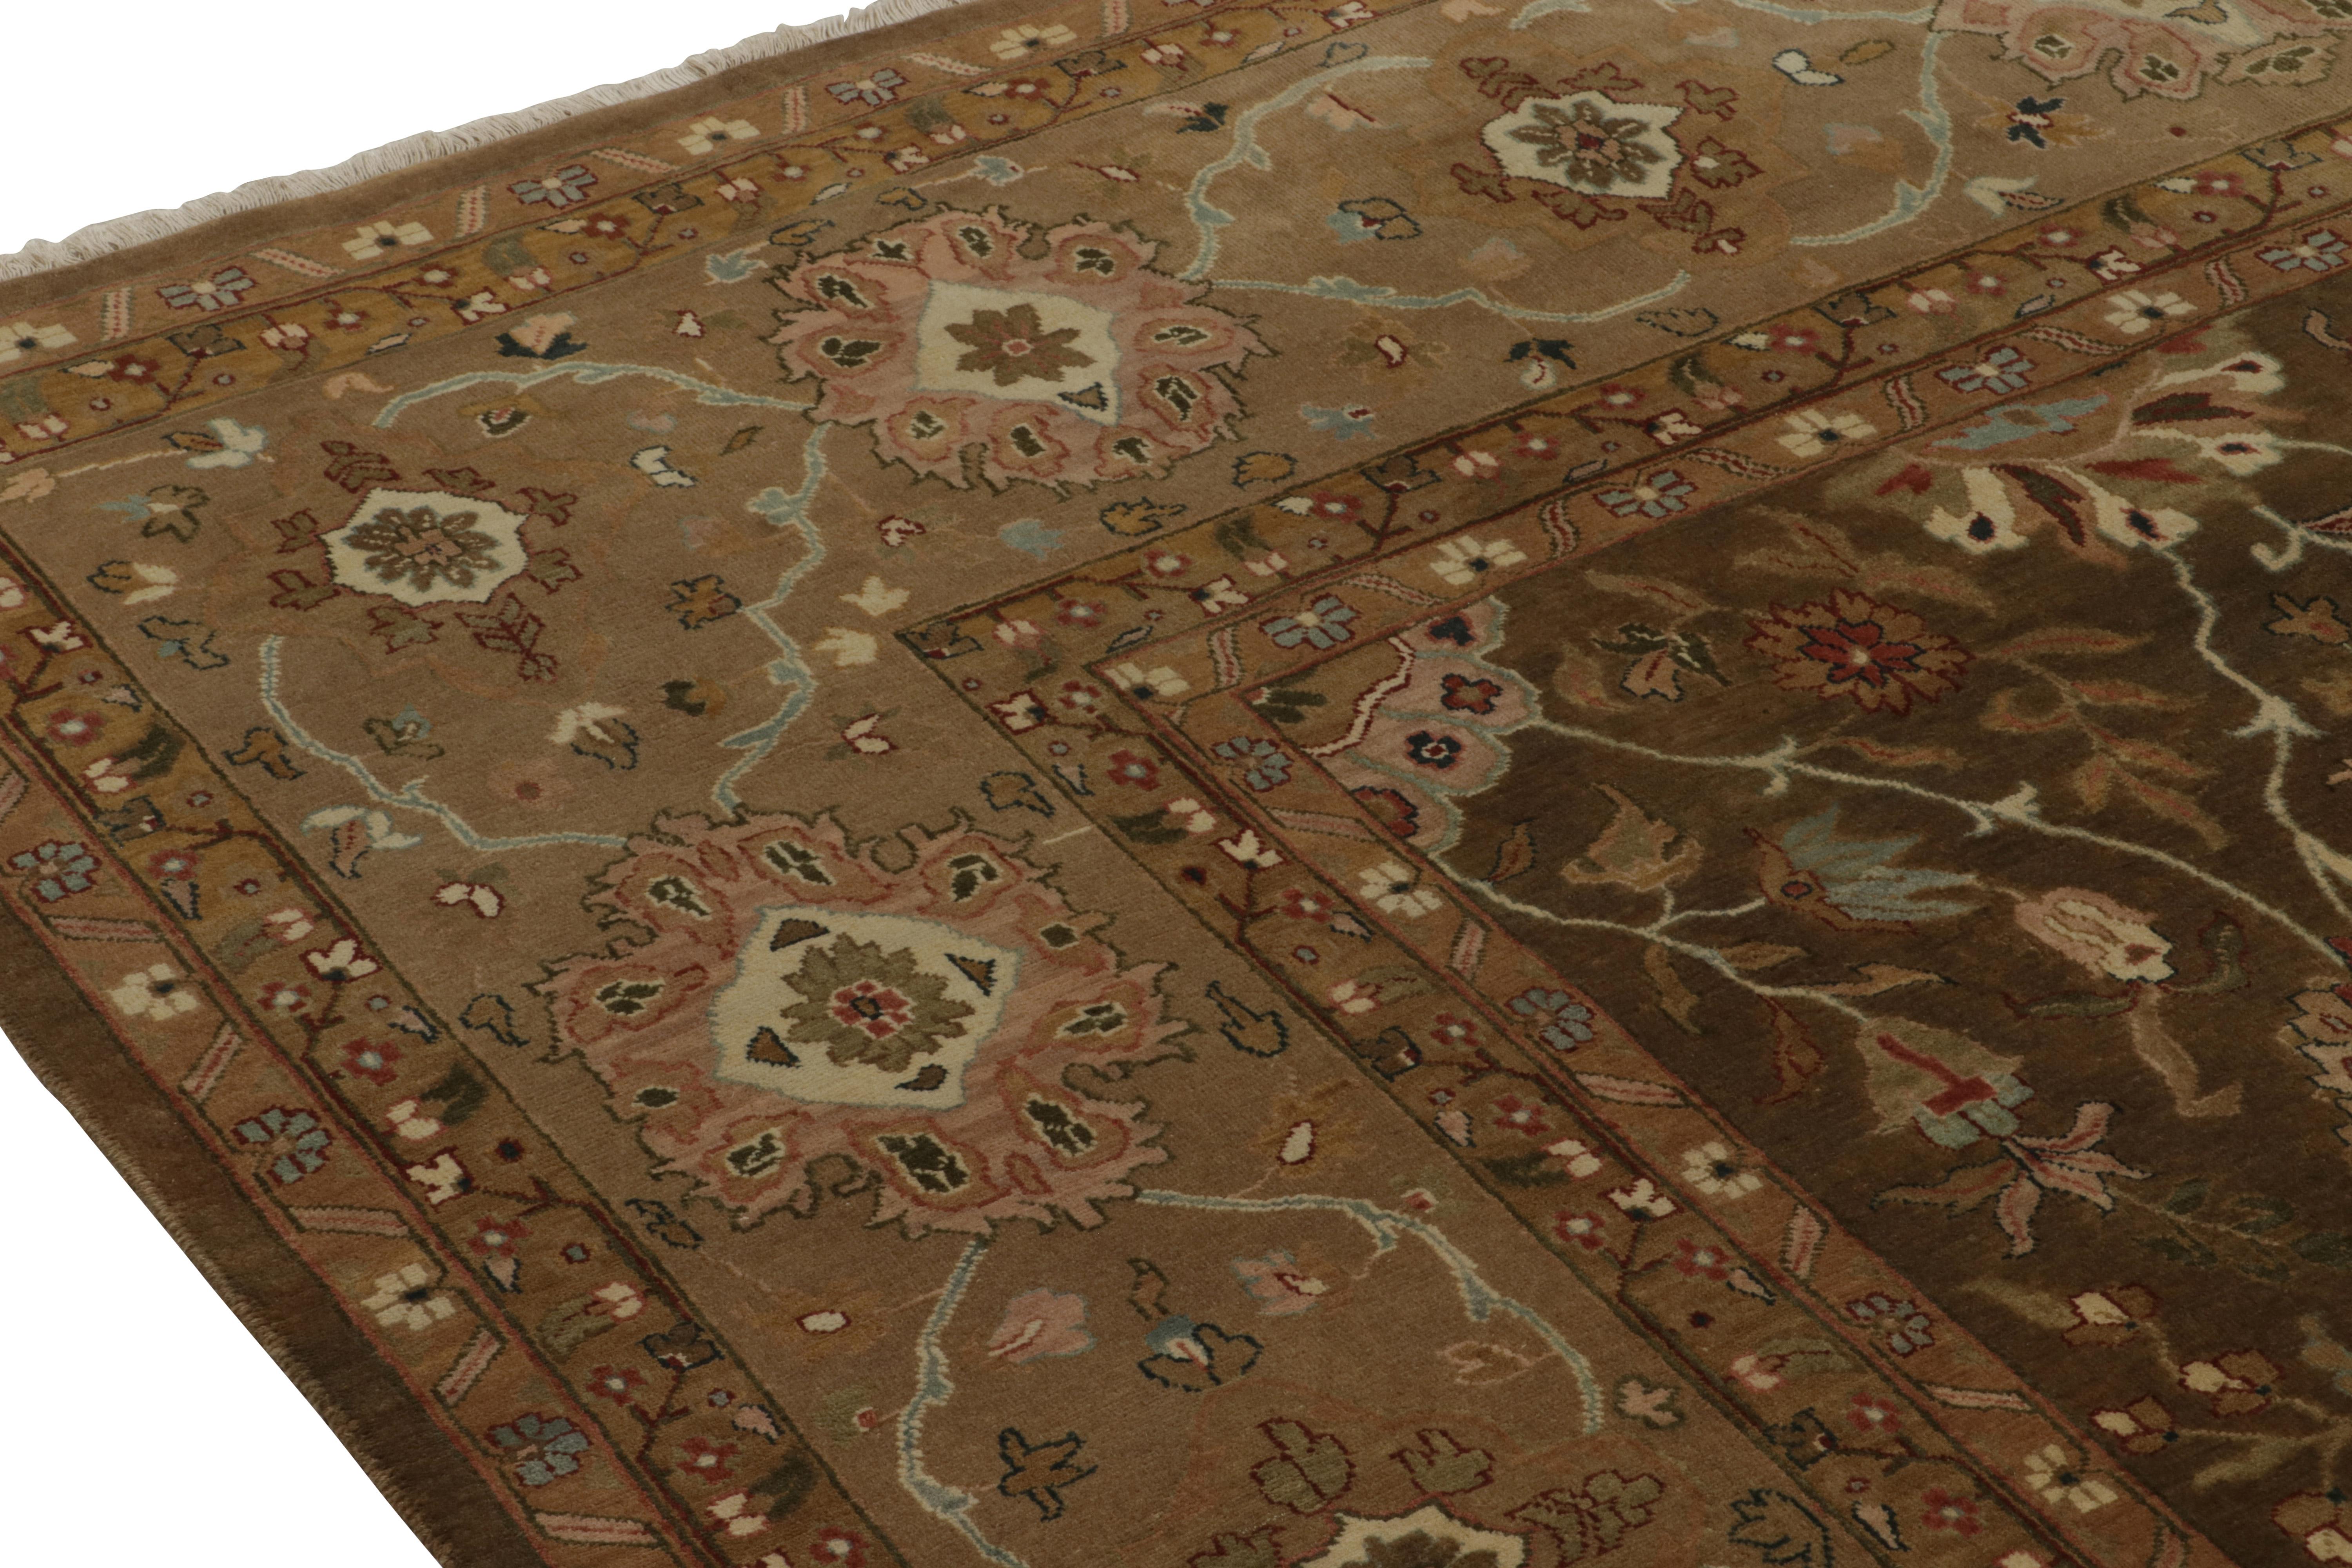 Rug & Kilim’s Tabriz style rug in Brown, Gold and Green Floral Patterns In New Condition For Sale In Long Island City, NY